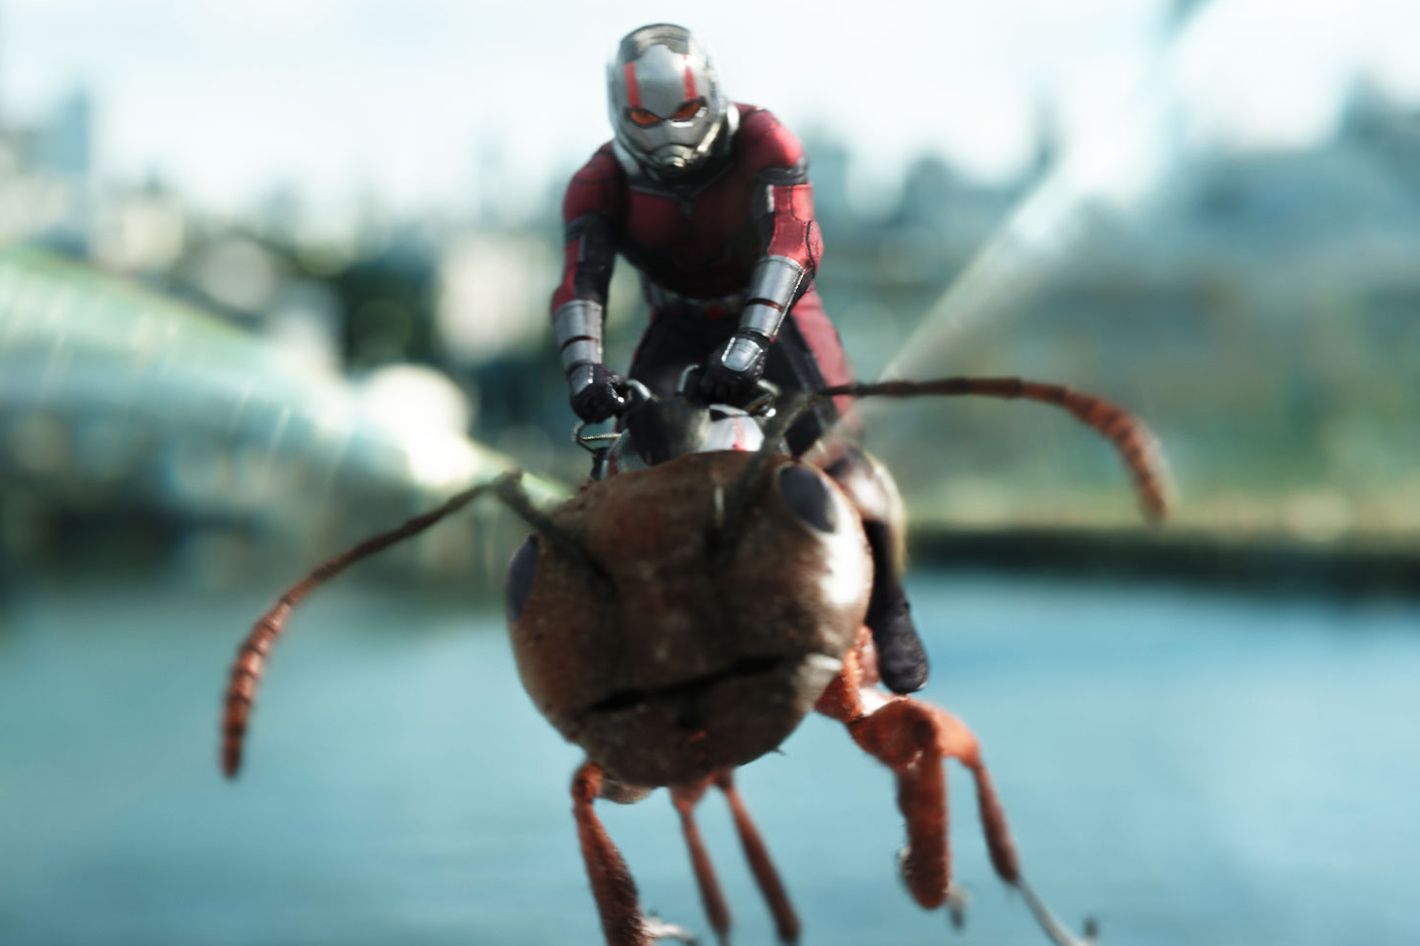 Ant-Man Is Marvel's Weirdest Movie, and That's a Good Thing